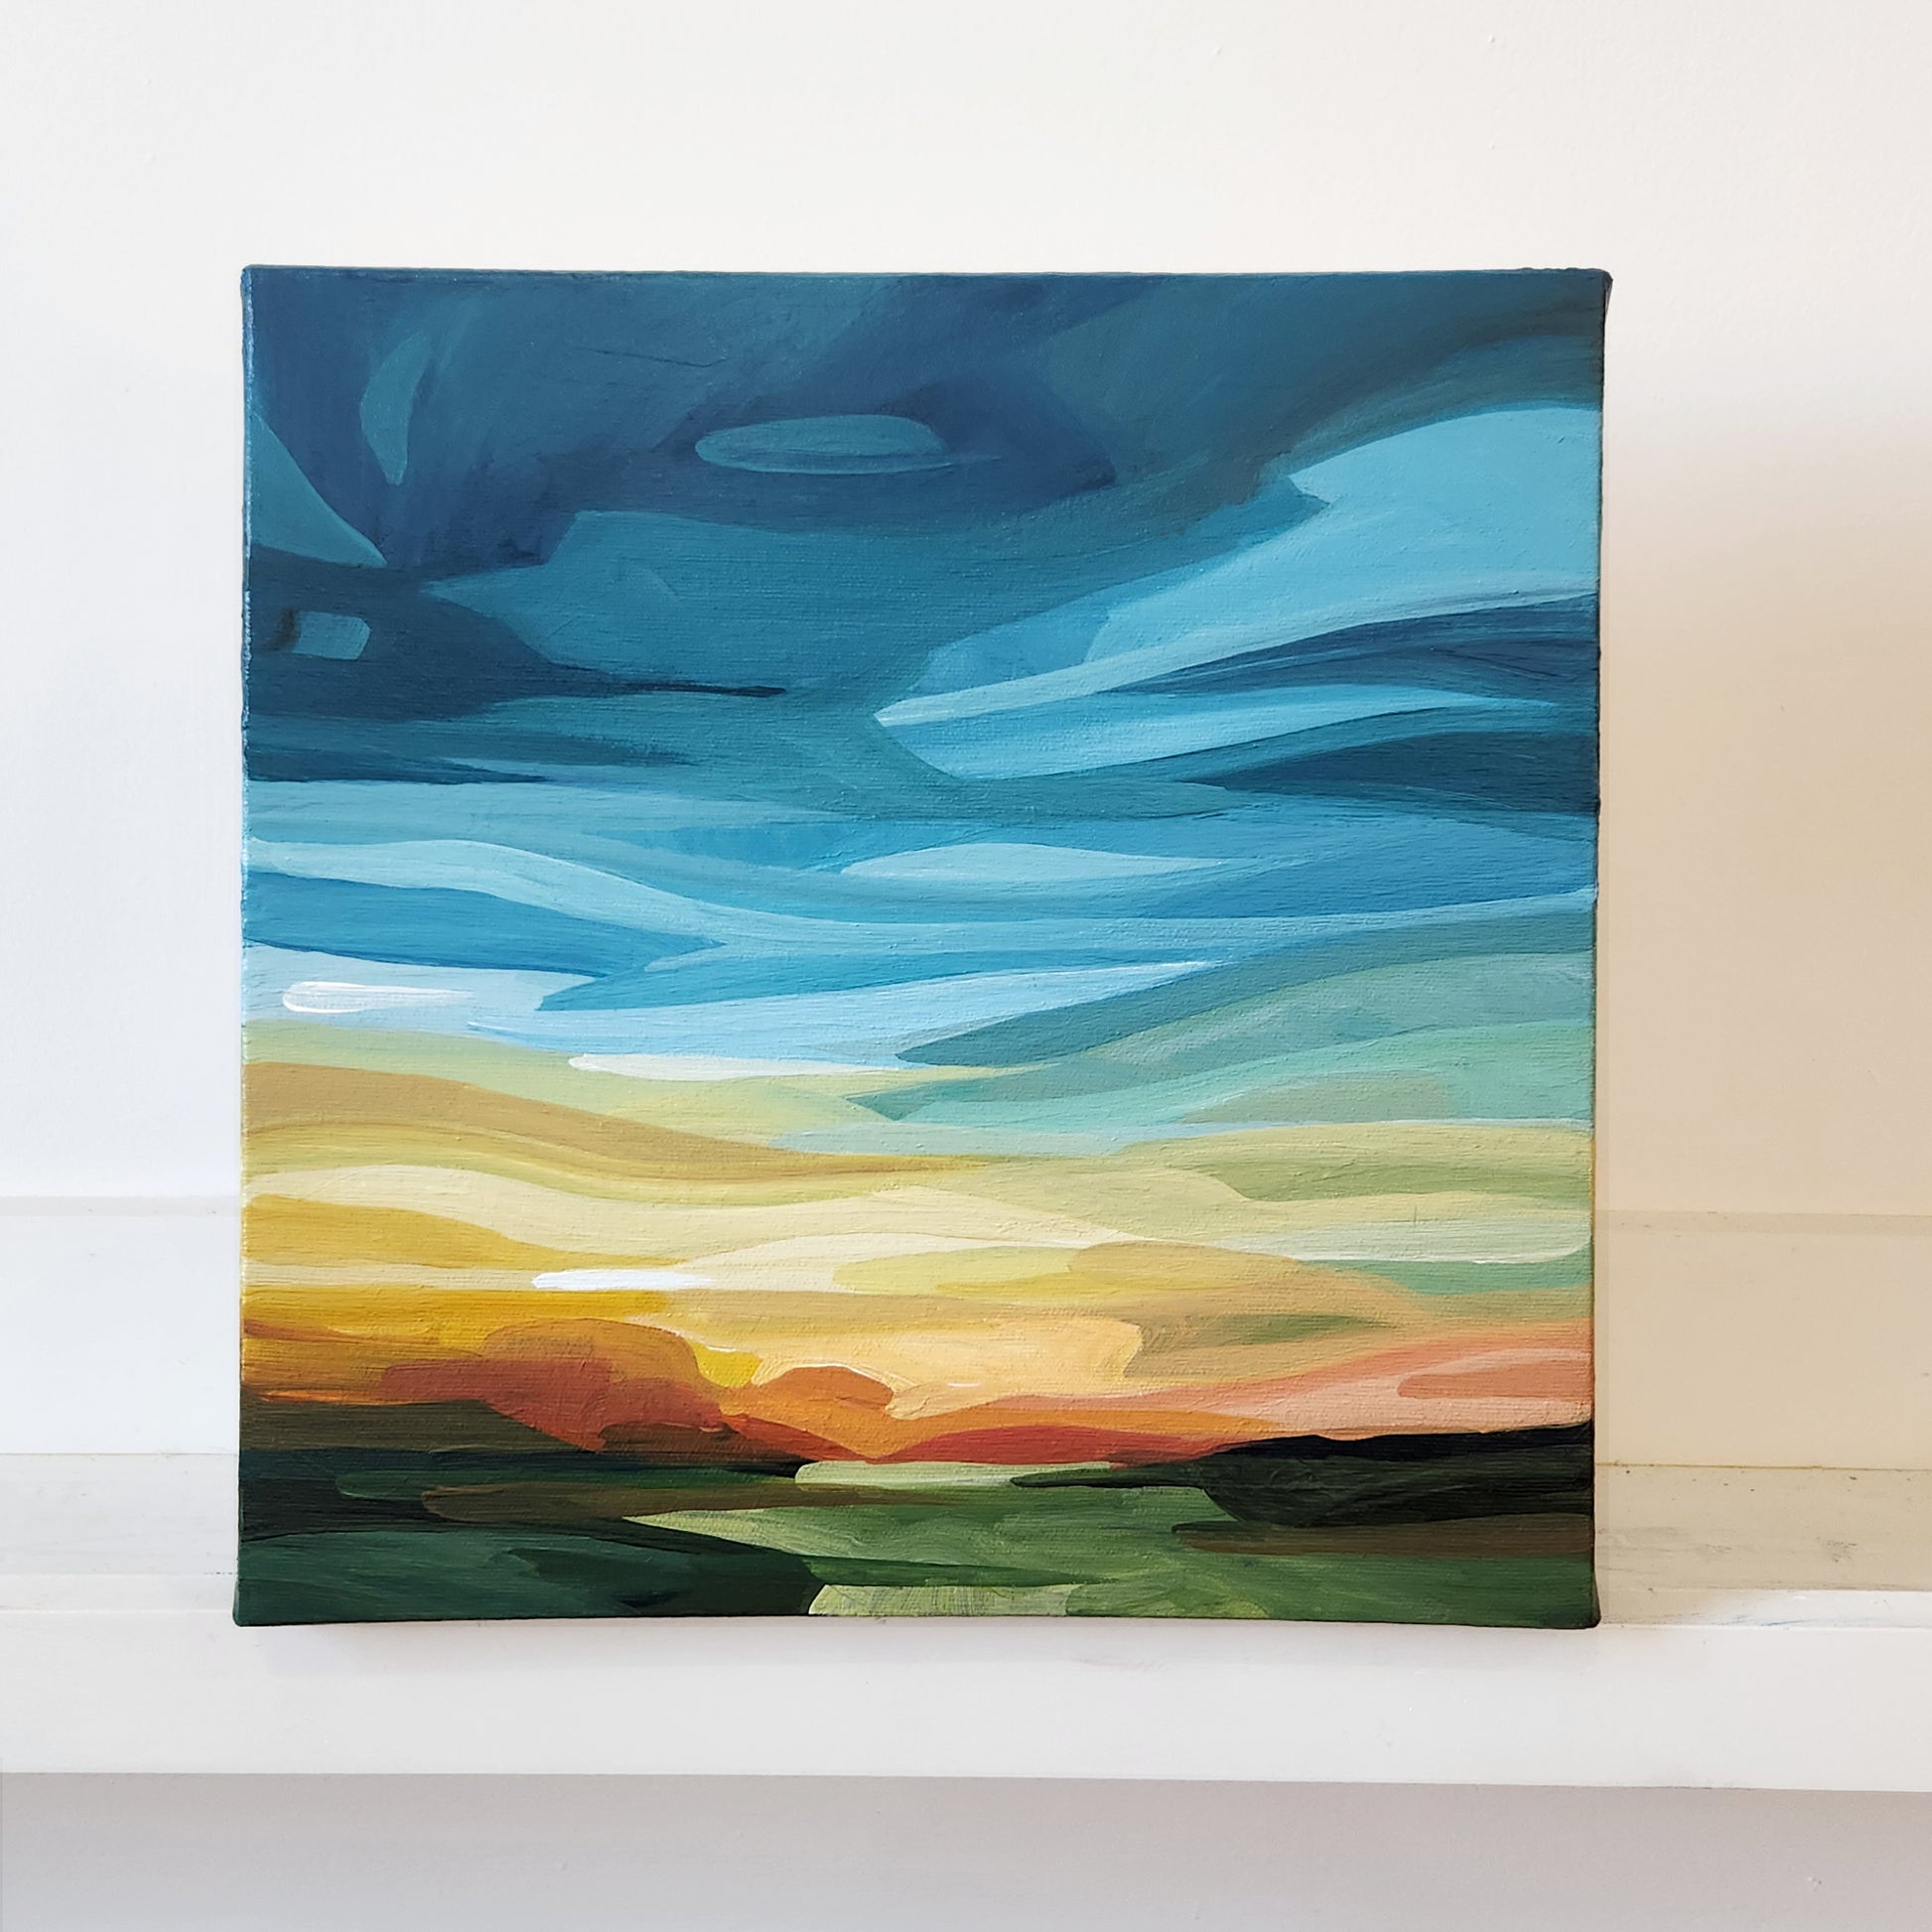 imagined landscape with colorful abstract sky